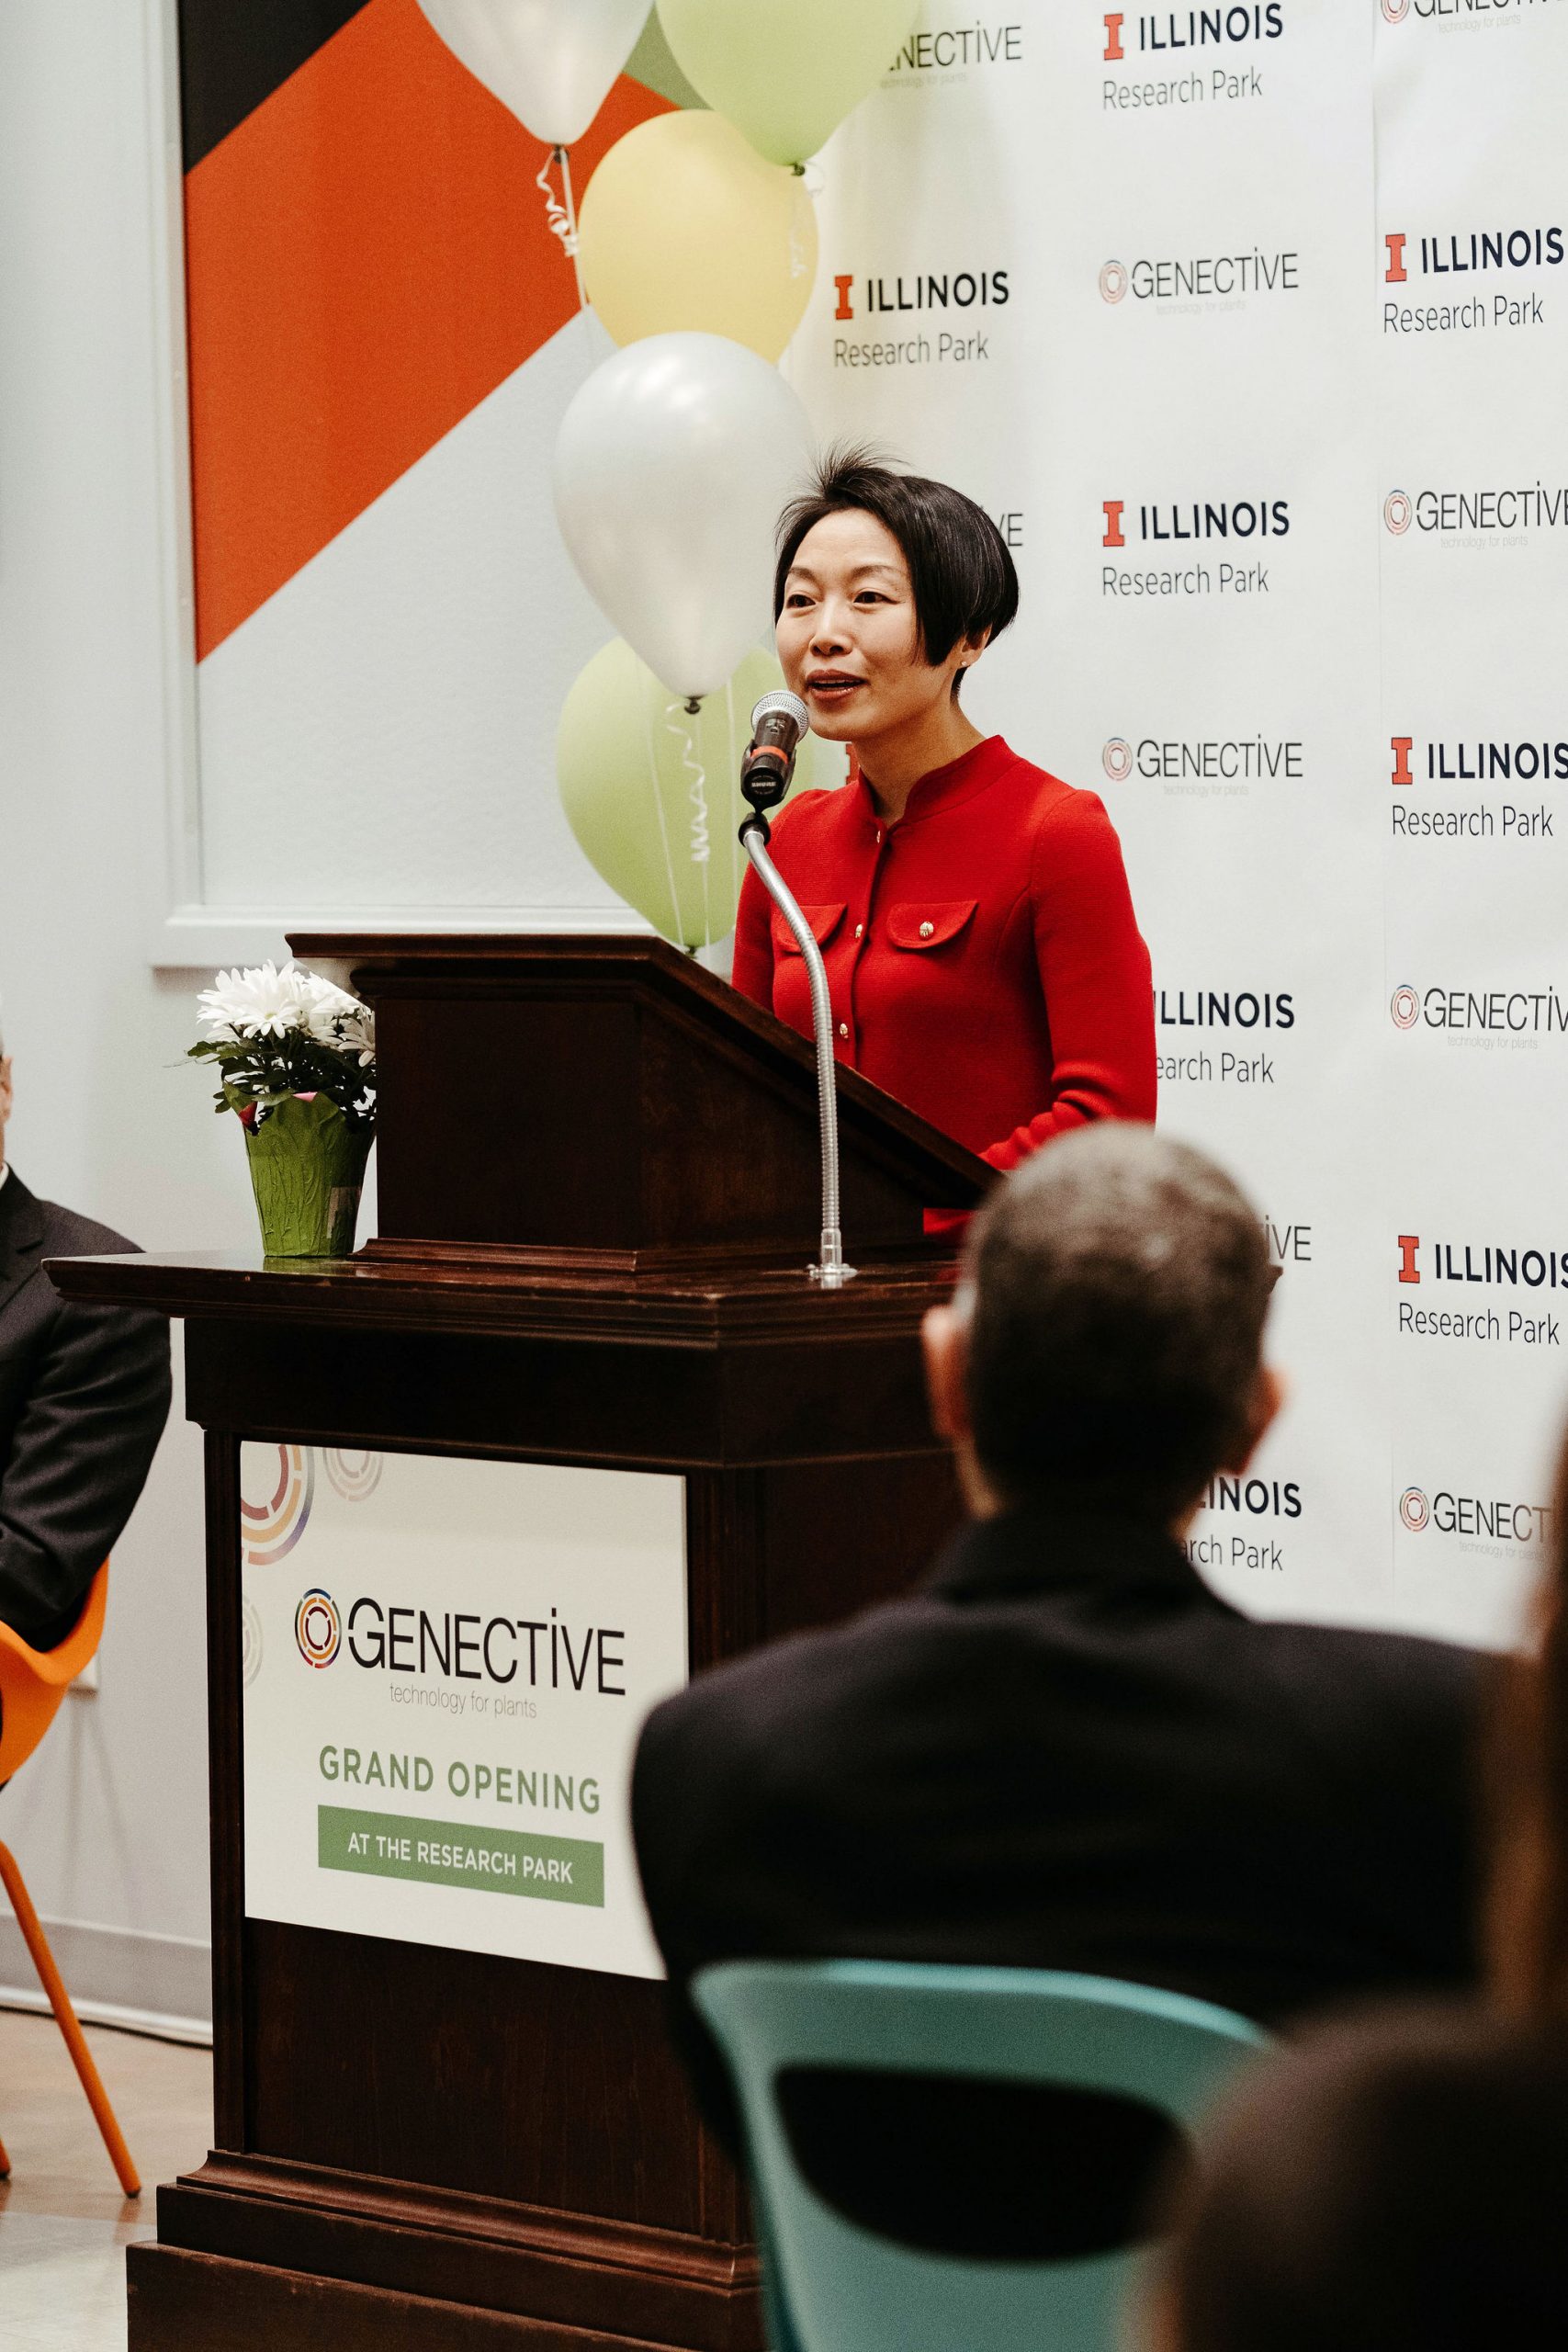 Talks at the Genective Grand Opening